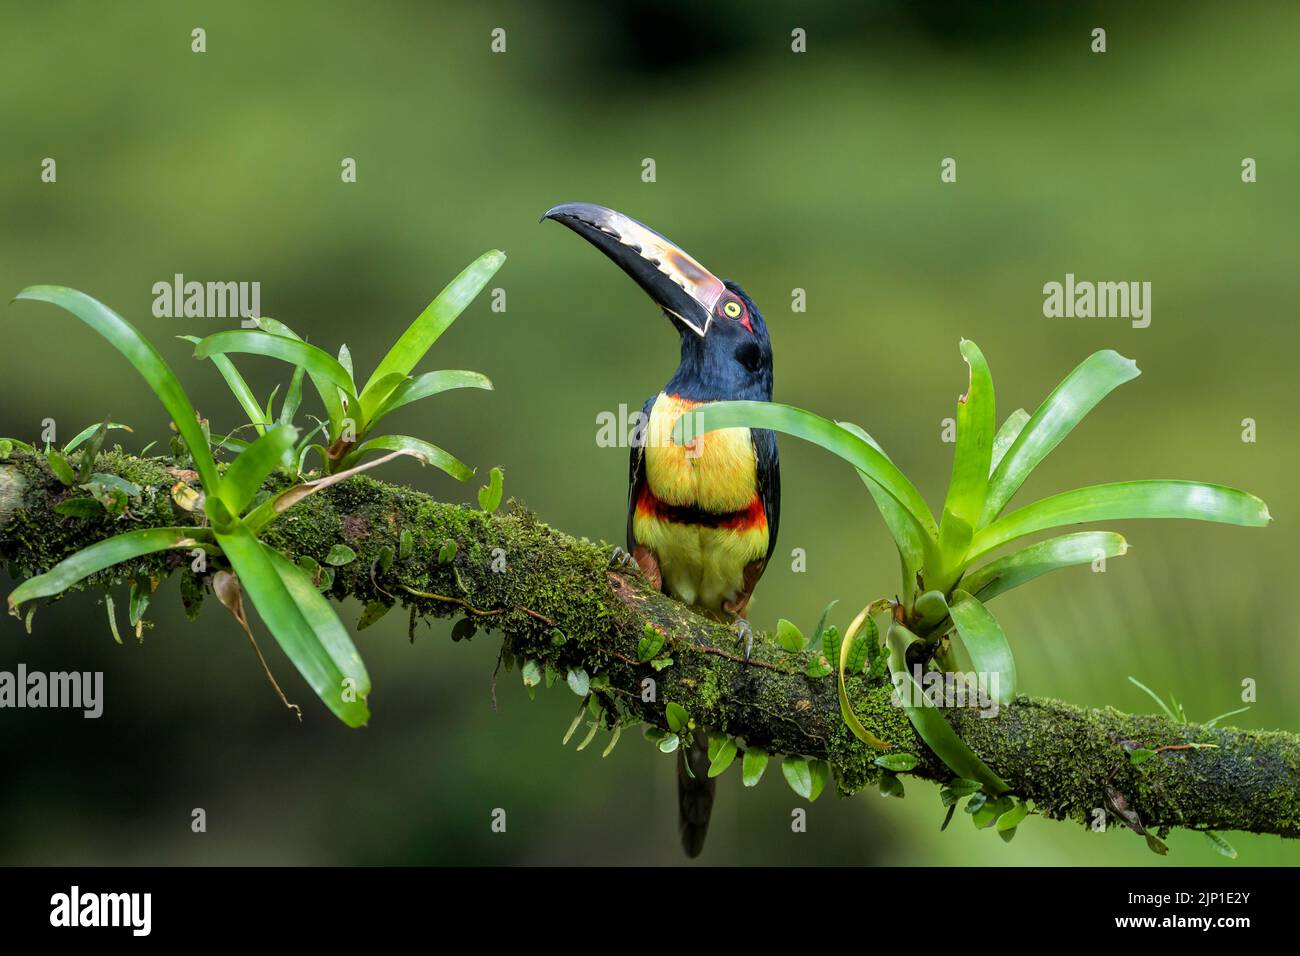 Collared aracari (Pteroglossus torquatus) perched on a branch, looking up, with moss and bromelia, Costa Rica Stock Photo